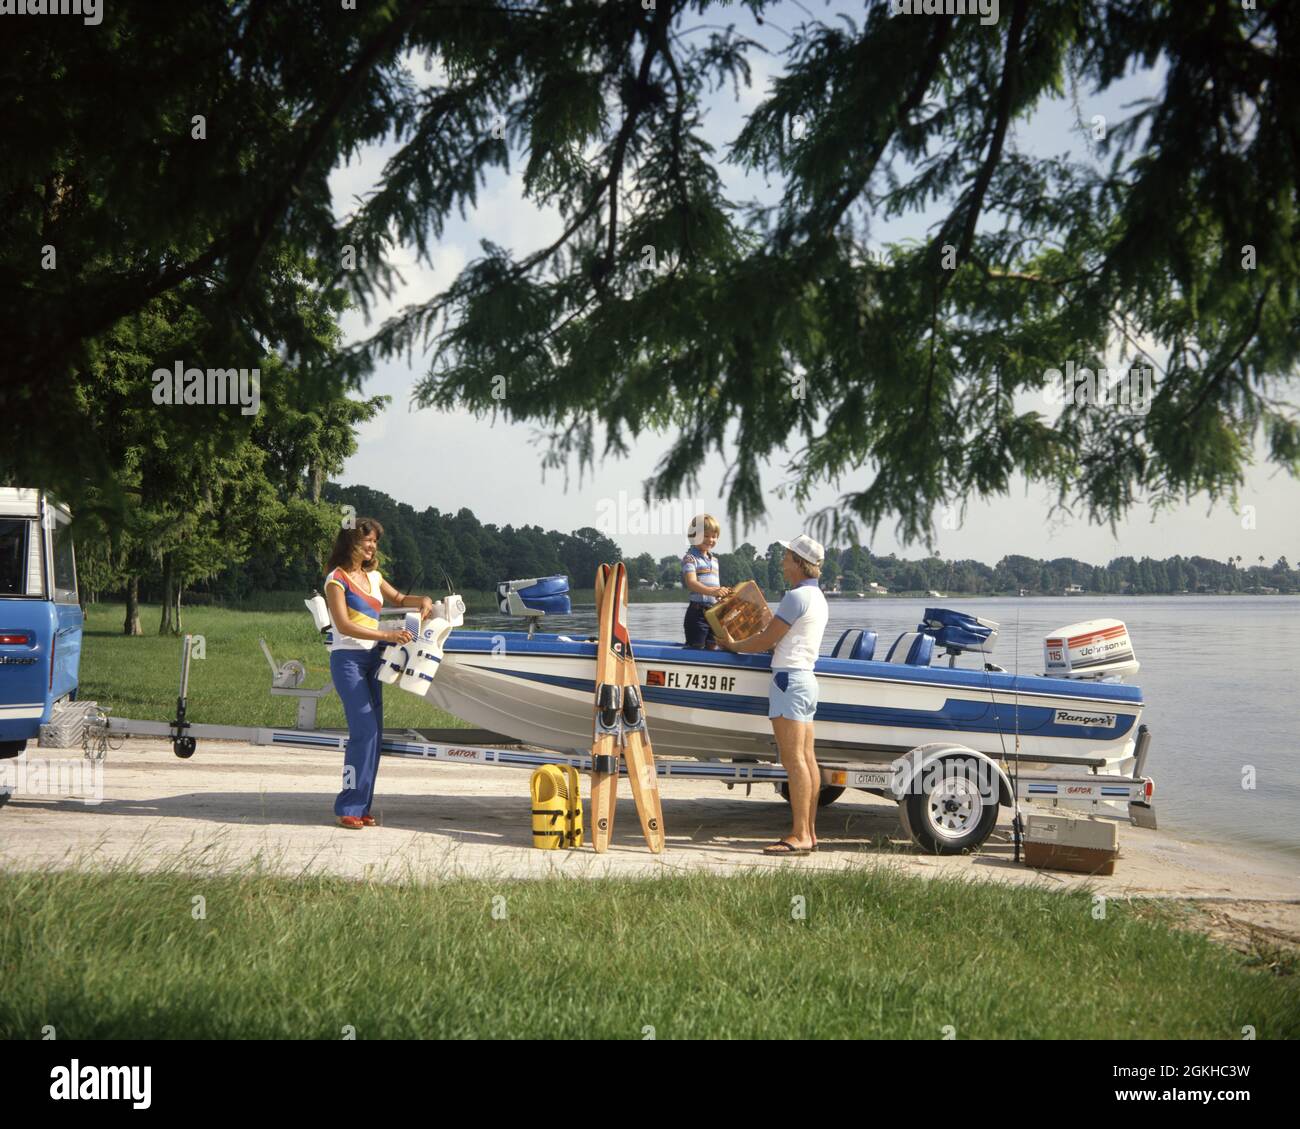 1980s FAMILY ON VACATION PREPARING TO PUT OUTBOARD MOTOR BOAT TOWED BEHIND  PICKUP TRUCK INTO LAKE WATER - kb15891 CYP001 HARS NOSTALGIC PAIR COLOR  MOTHERS OLD TIME FIGURES NOSTALGIA TRAILER OLD FASHION